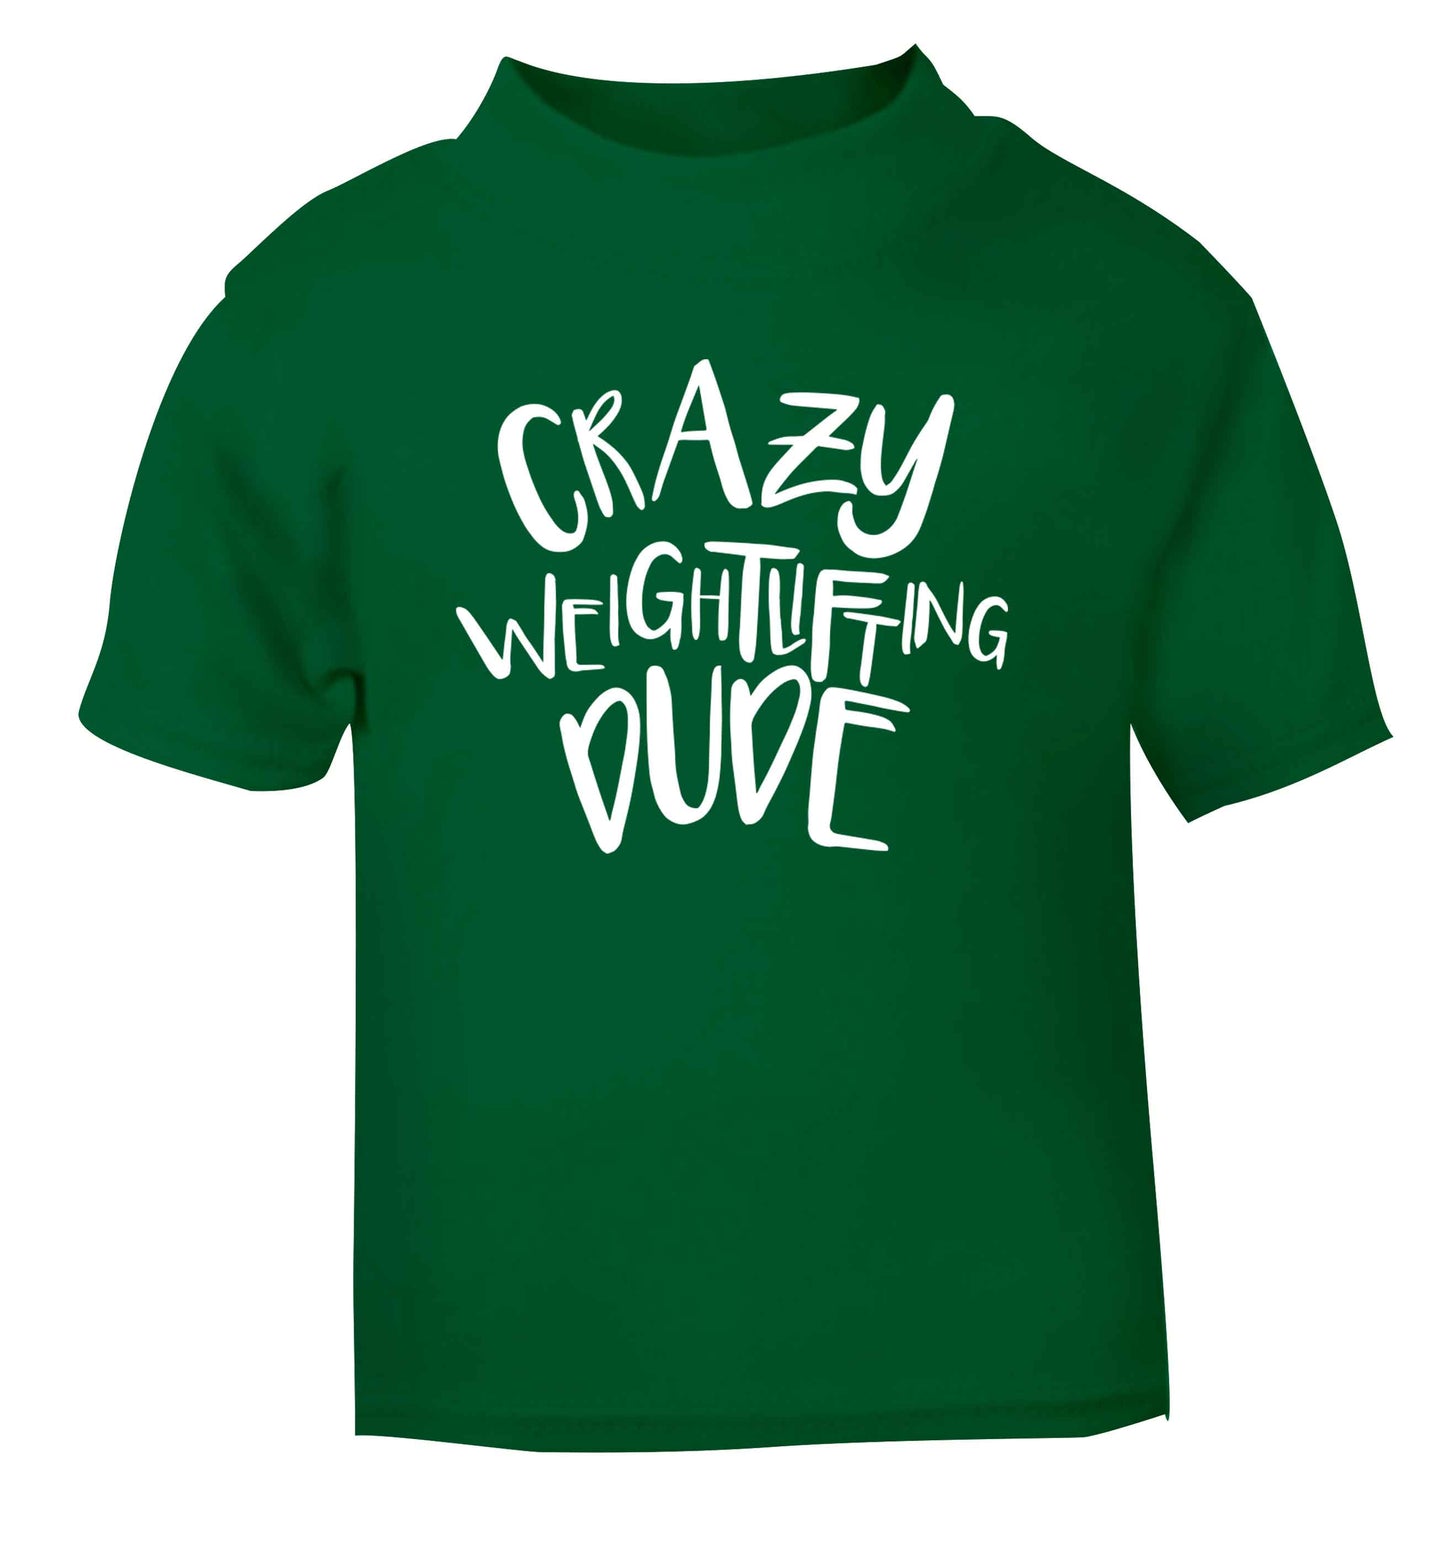 Crazy weightlifting dude green Baby Toddler Tshirt 2 Years